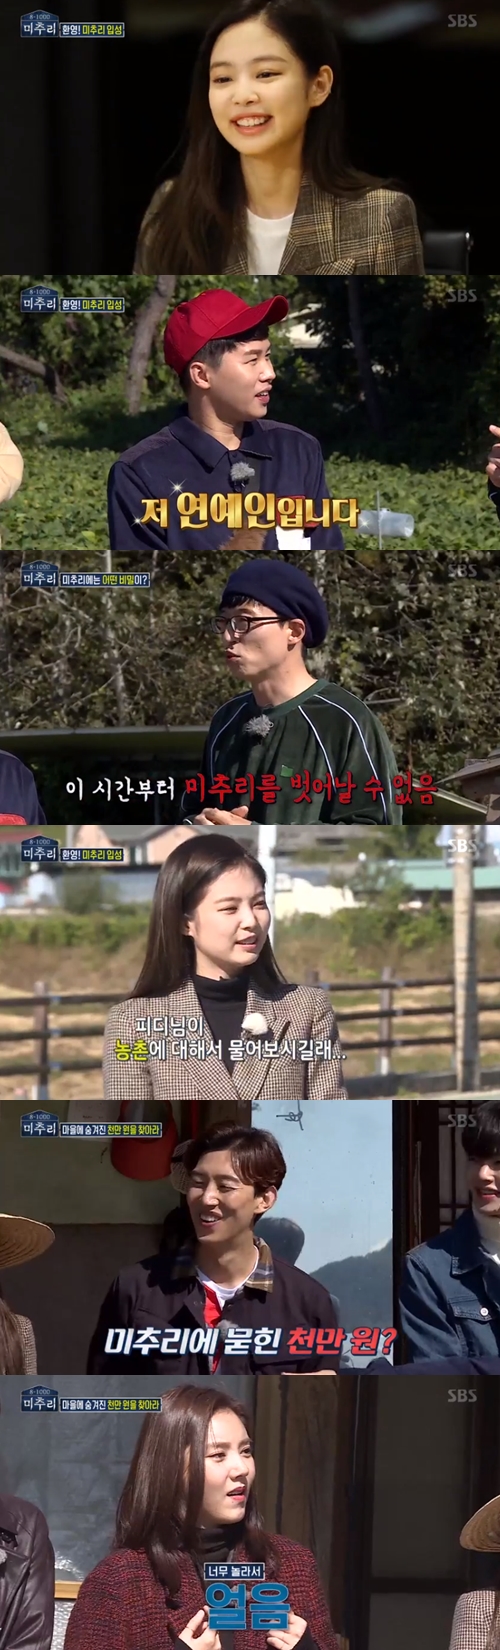 Michu and 8 members started a laughing journey for 10 million won.On the 16th, SBS entertainment program Michu and 8 - 1000 (hereinafter referred to as Michu and) was shown members looking for hints for 10 million won hidden in the village.Eight members gathered together on the day. Yoo Jae-seok, who last appeared, said, I will live in isolation from now on.It is thoroughly controlled here, he declared, and needless goods should be returned to the independent life.In Songgangs bag, a cartoon character Chungu doll came out, and Songgang said, I brought it because I liked Changu. Then Jenny asserted, There is no item to return.Yang Se-heeong then quipped numbly, Mr Jenny, you have to take the cuteness away.Then Son Dam-bi, who was next to him, laughed, saying, I really want to hit one.The members learned about the secrets about Michu and the village. They had to find 10 million won hidden for one night and two days.Before entering the village, they chose one different item for their isolation, which was a hint tool that would be useful for finding 10 million won.Jenny was very impressed by the fact that 10 million won was hidden. There are four members, he said, laughing.Songgang also said, I will eat beef if I get 10 million won.Then they dispersed and started preparing for lunch. Kim Sang-ho and Jang Doyeon started to pick sweet potatoes.Jang Doyeon was alert for a 10 million won hint and found a questionable red stone.Kang Ki-young also found a red stone while fishing and quickly picked it up; his earlier choice was a hammer, and he used a hammer to break a red stone to obtain a hint.Joy also noticed this for a while, and found a red stone, no matter what you did.Jenny struggled to find a hint: he found a toaster in the kitchen and put his bread into the toaster, which he had chosen earlier.Yang Se-heeong found this, and embarrassed Jenny said, Please show me the palace once.Jenny baked bread in the repeated interruption of Yang Se-heeong, and soon found the HOT mark on the back of the bread.The dinner members started a hint tool acquisition game. Yoo Jae-seoks first question was, Ive dated an entertainer.When the members rebelled, Yoo Jae-seok shouted, I am not interested in other peoples love affairs.Jang Doyeon replied yes, while Son Dam-bi chastised him, saying dont lie; then Jang Doyeon said: Its not on the gag side.I heard a little bit before, and the nickname is Min, Yang Se-heeong said.When asked I want to go home, all members except Yang Se-heeong and Kang Ki-young answered yes.Im Soo-hyang said, Its fun, I want to go home, Yang Se-hyeong said, Jang Doyeon does not want to go home, but sits down to fart.Eventually, the Kang Ki-young team was teamed by Songgang - Im Soo-hyang - Jenny, and Kim Sang-ho team consisted of Yang Se-heeong - Jang Doyeon - Son Dam-bi.The first event was Salim Volleyball; Jenny and Im Soo-hyang showed off an unexpected sharp serve.On the other hand, Jang Doyeon and Son Dam-bi failed to turn one over to the net; in particular, Jang Doyeon blew the ball over the roof and emanated a fuss.So Son Dam-bi threw out the basin and was irritated.After a fierce battle, Kim Sang-hos team won, and they copied Kang Ki-youngs tool, the hammer.On the other hand, Michu and is broadcast every Friday at 9:55 pm.Photo SBS broadcast screen capture